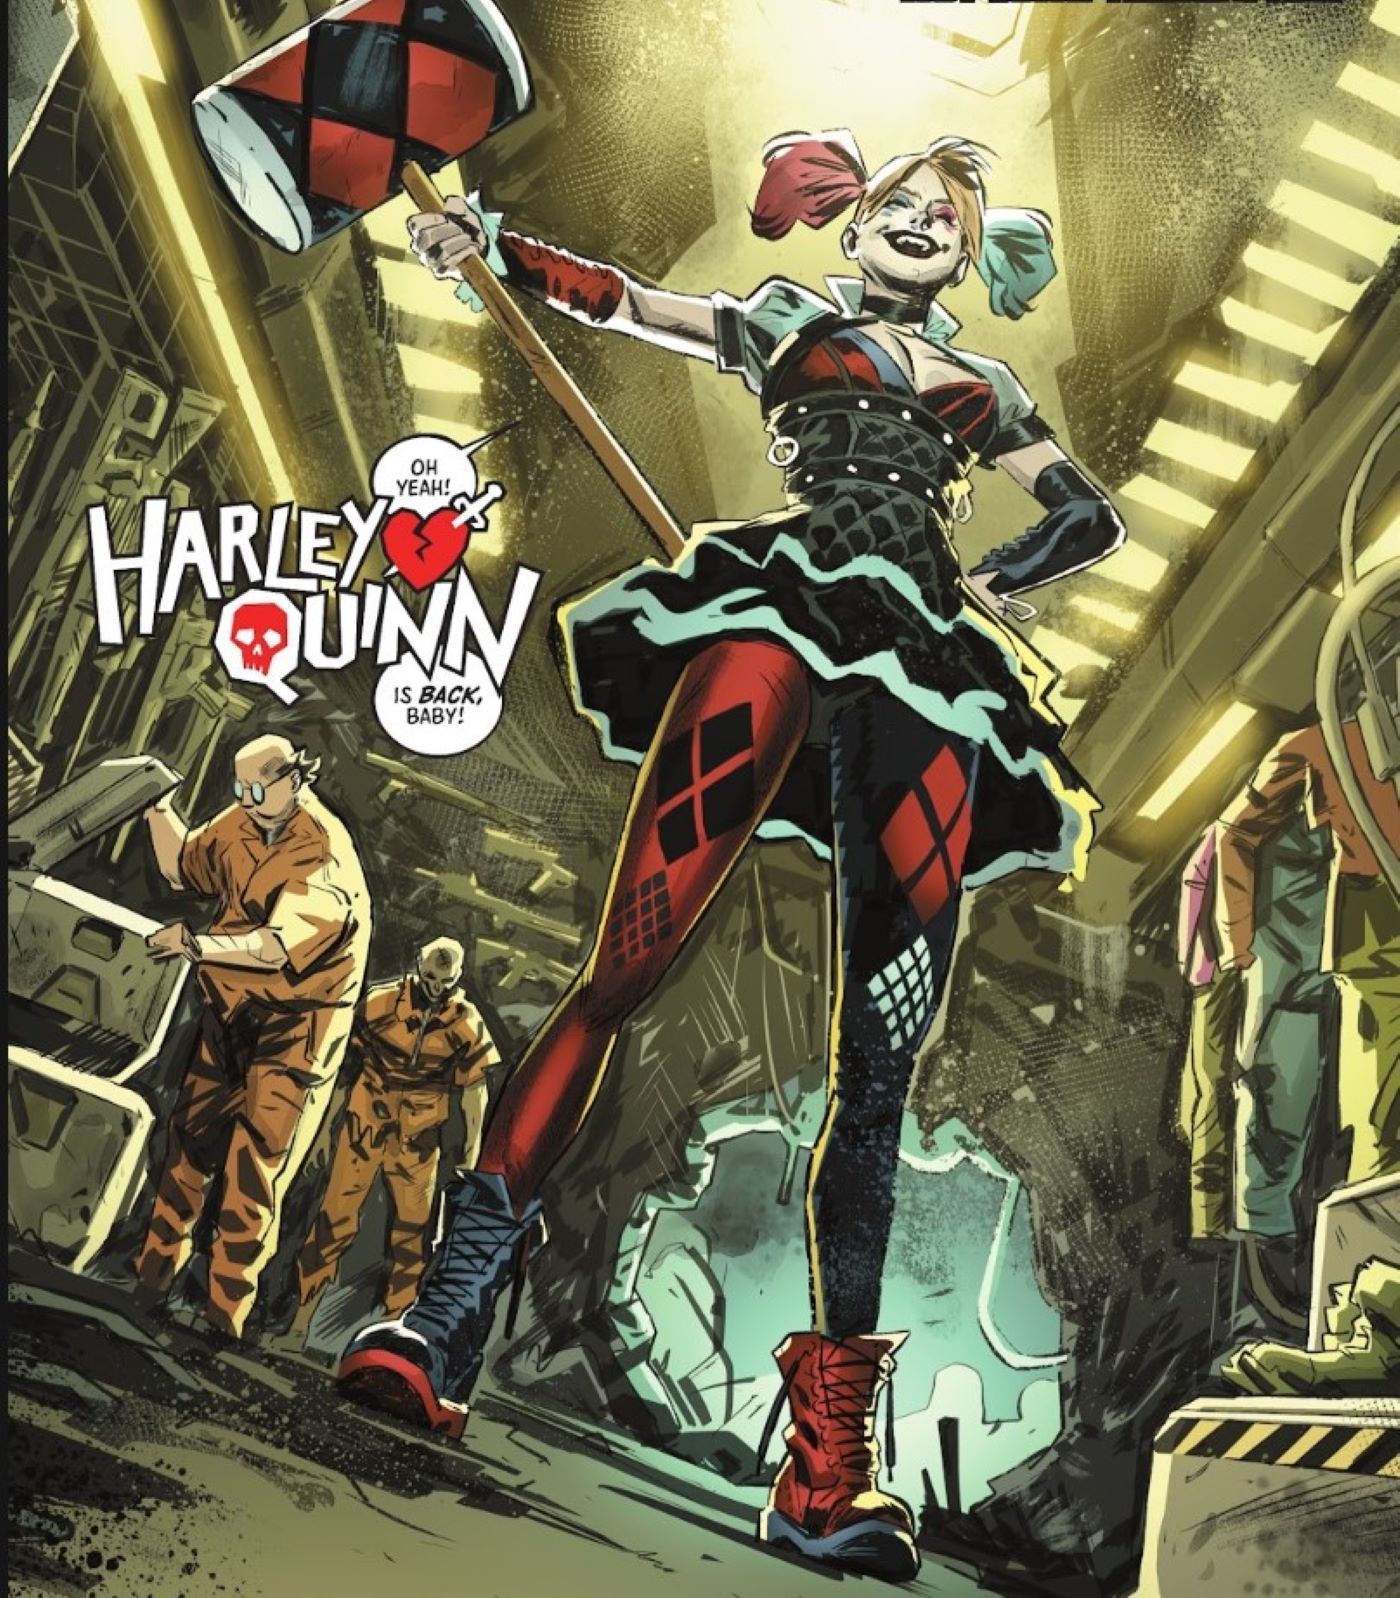 Harley Quinn’s Underrated Video Game Costume Returns with Perfect Upgrades